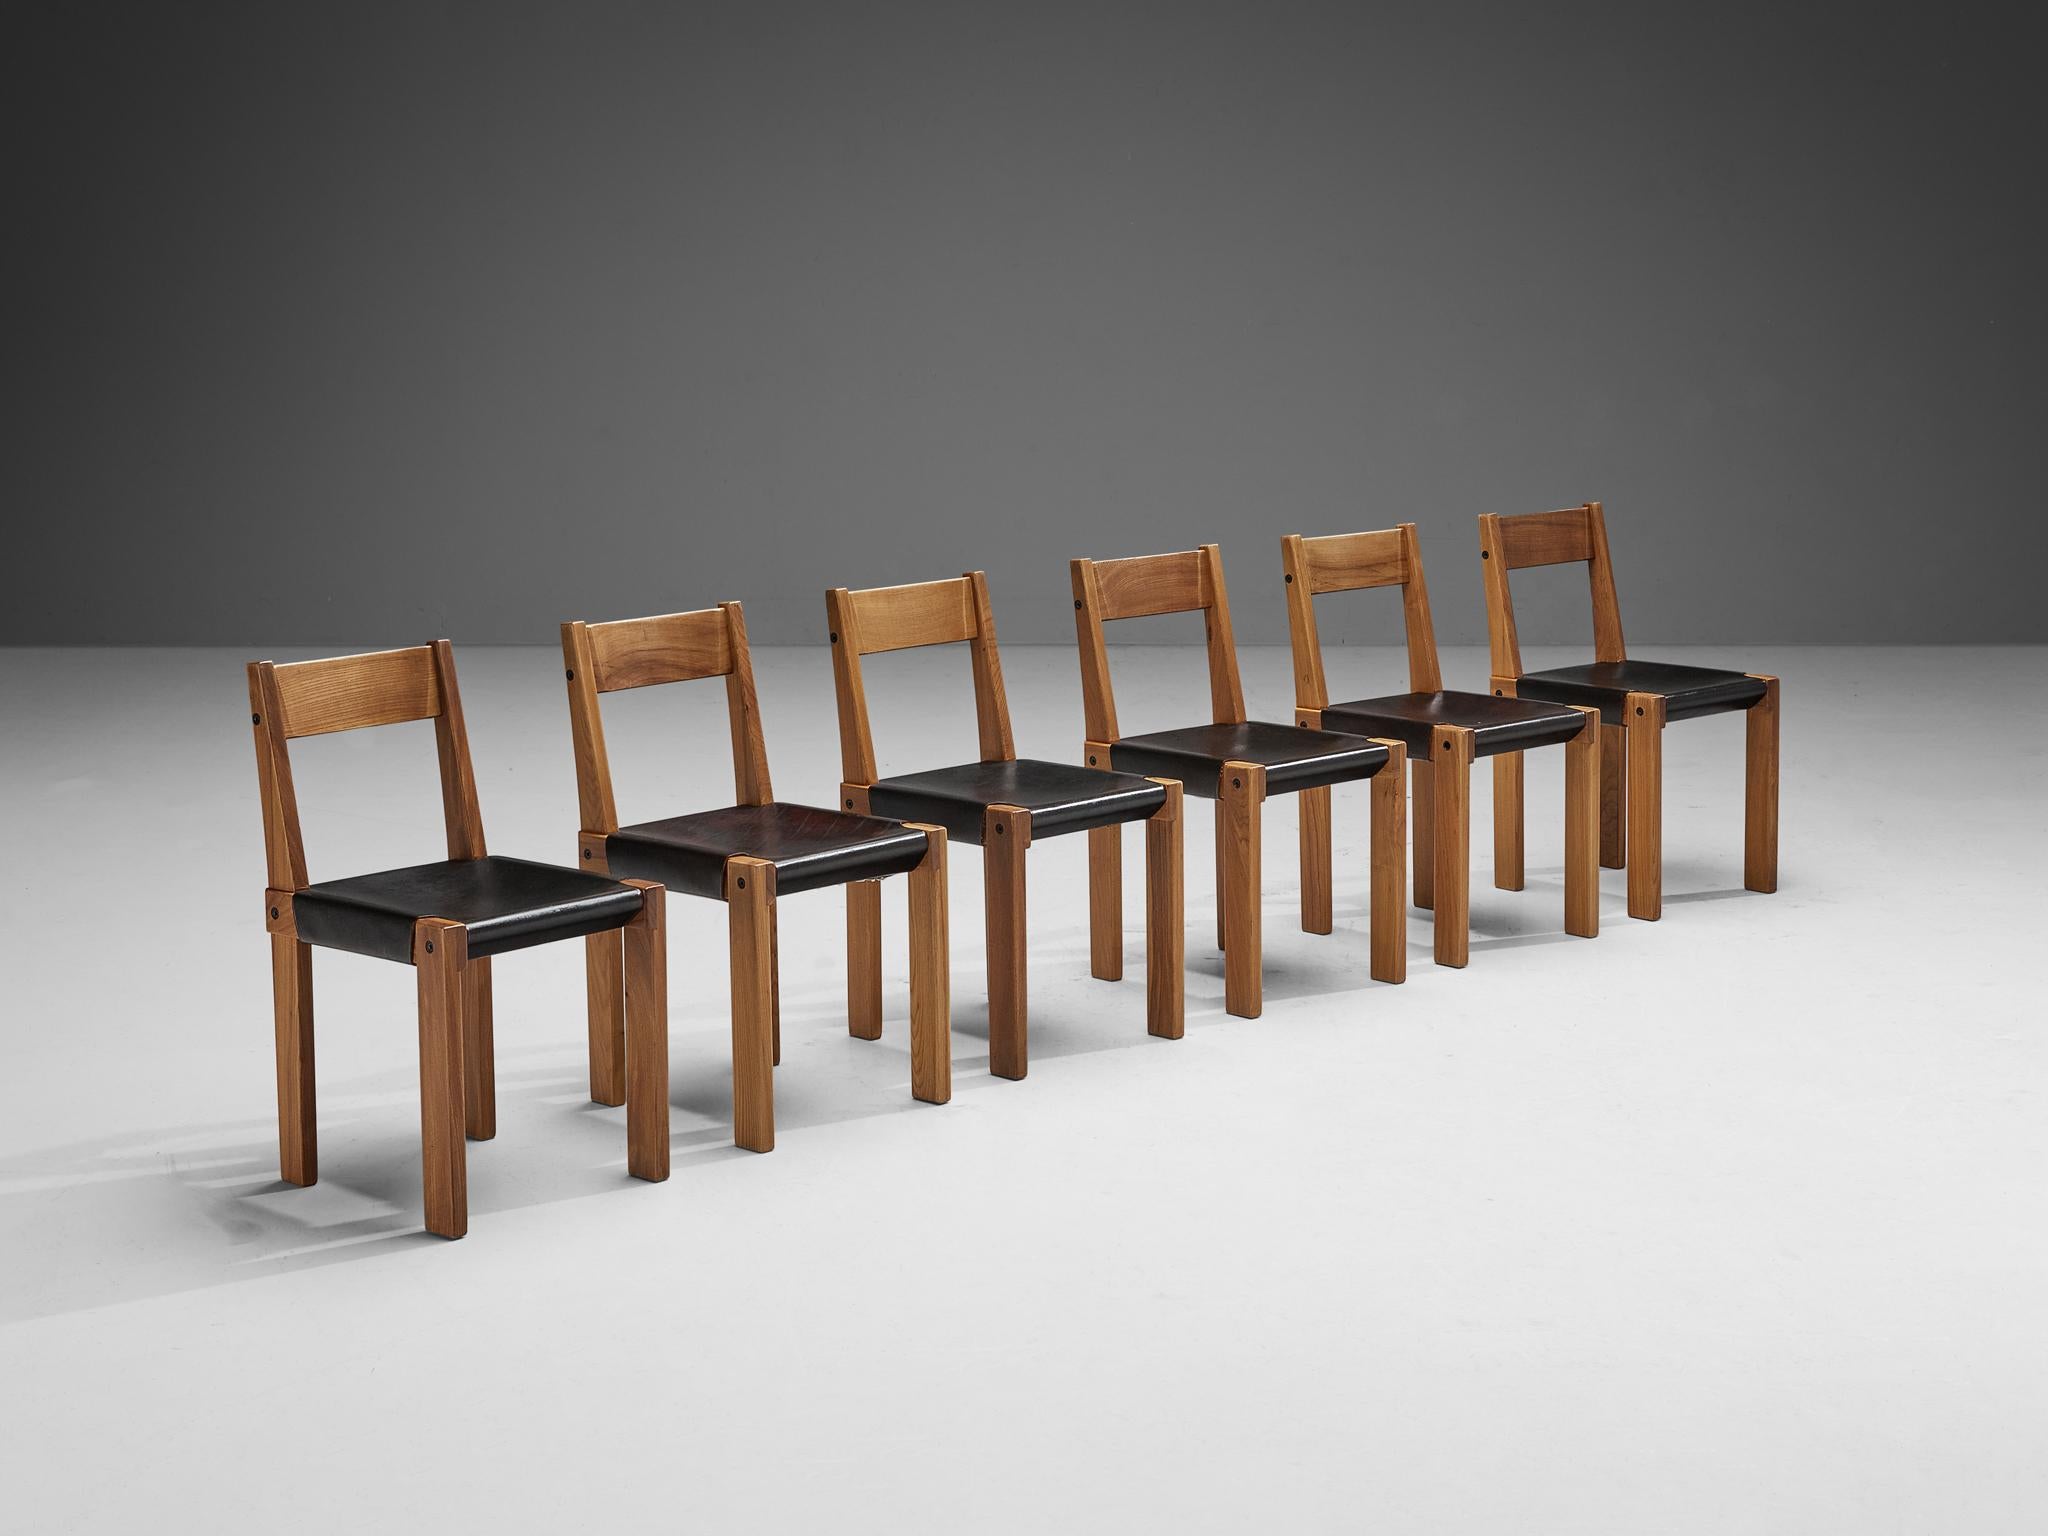 Pierre Chapo, set of six dining chairs model 'S24', elm, leather, rope, France, 1960s

Dining chairs in solid elmwood with saddle leather seating and back designed by French designer Pierre Chapo. These chairs have a cubic design of solid elmwood